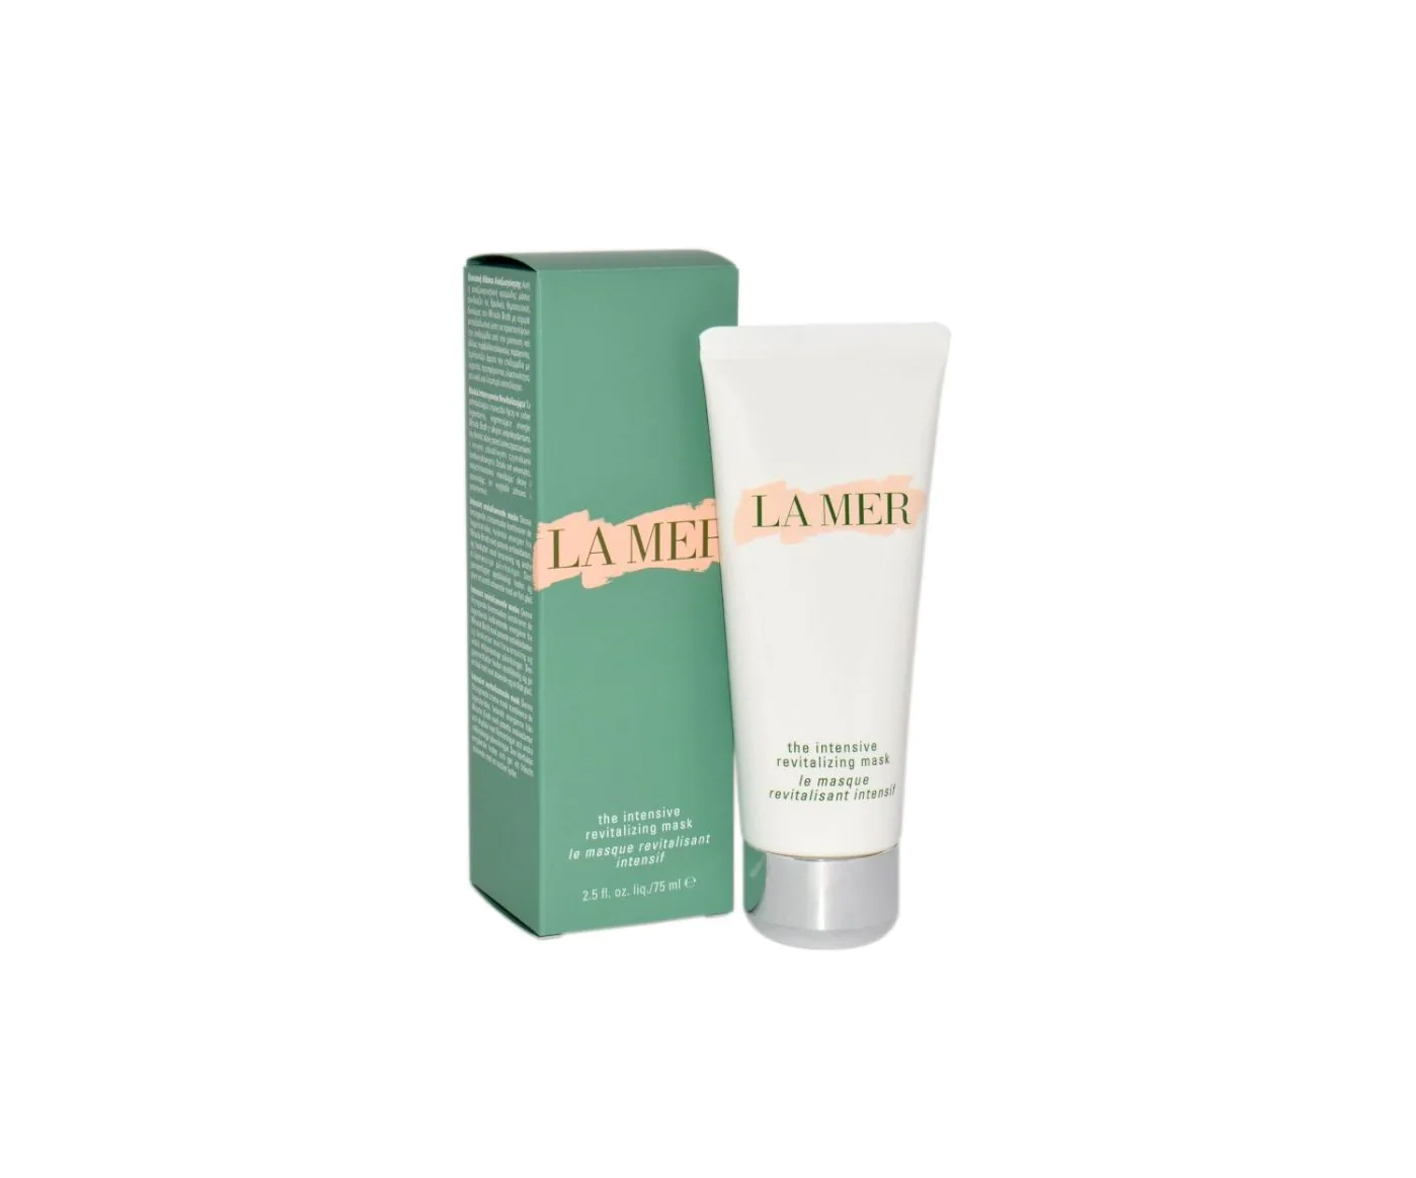 La Mer, The Intensive Revitalizing Mask, A mask supporting face lifting